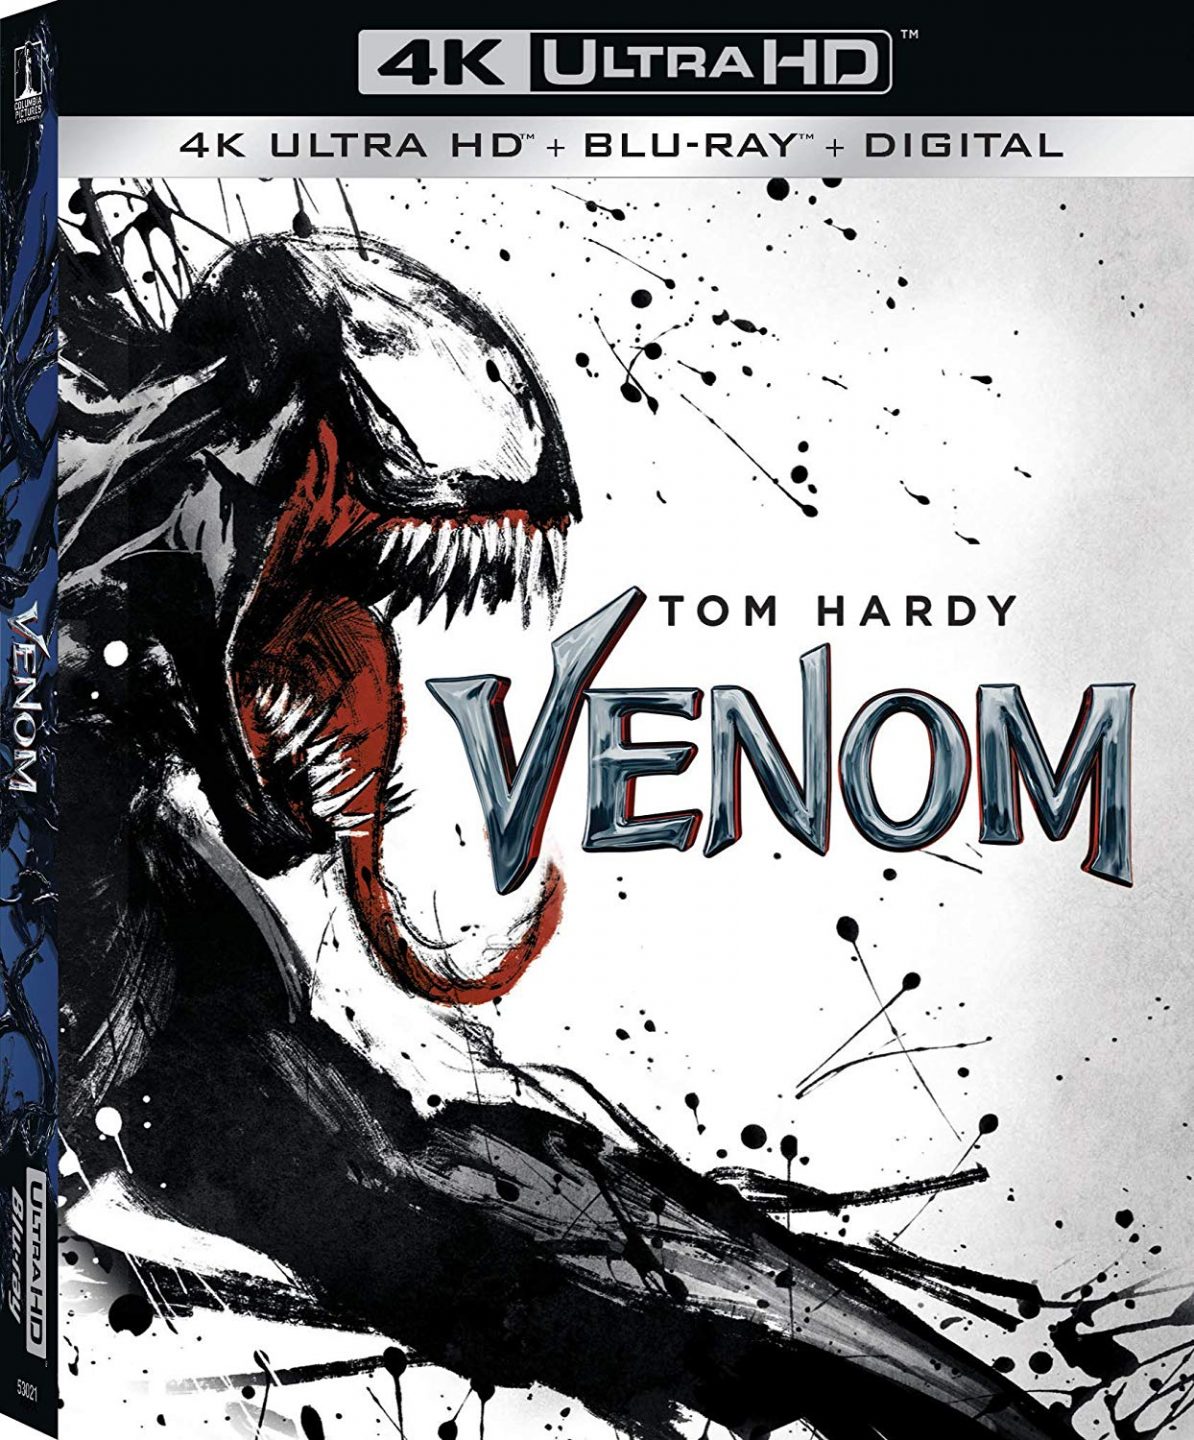 Venom 4K Ultra HD Combo Pack cover (Sony Pictures Home Entertainment)